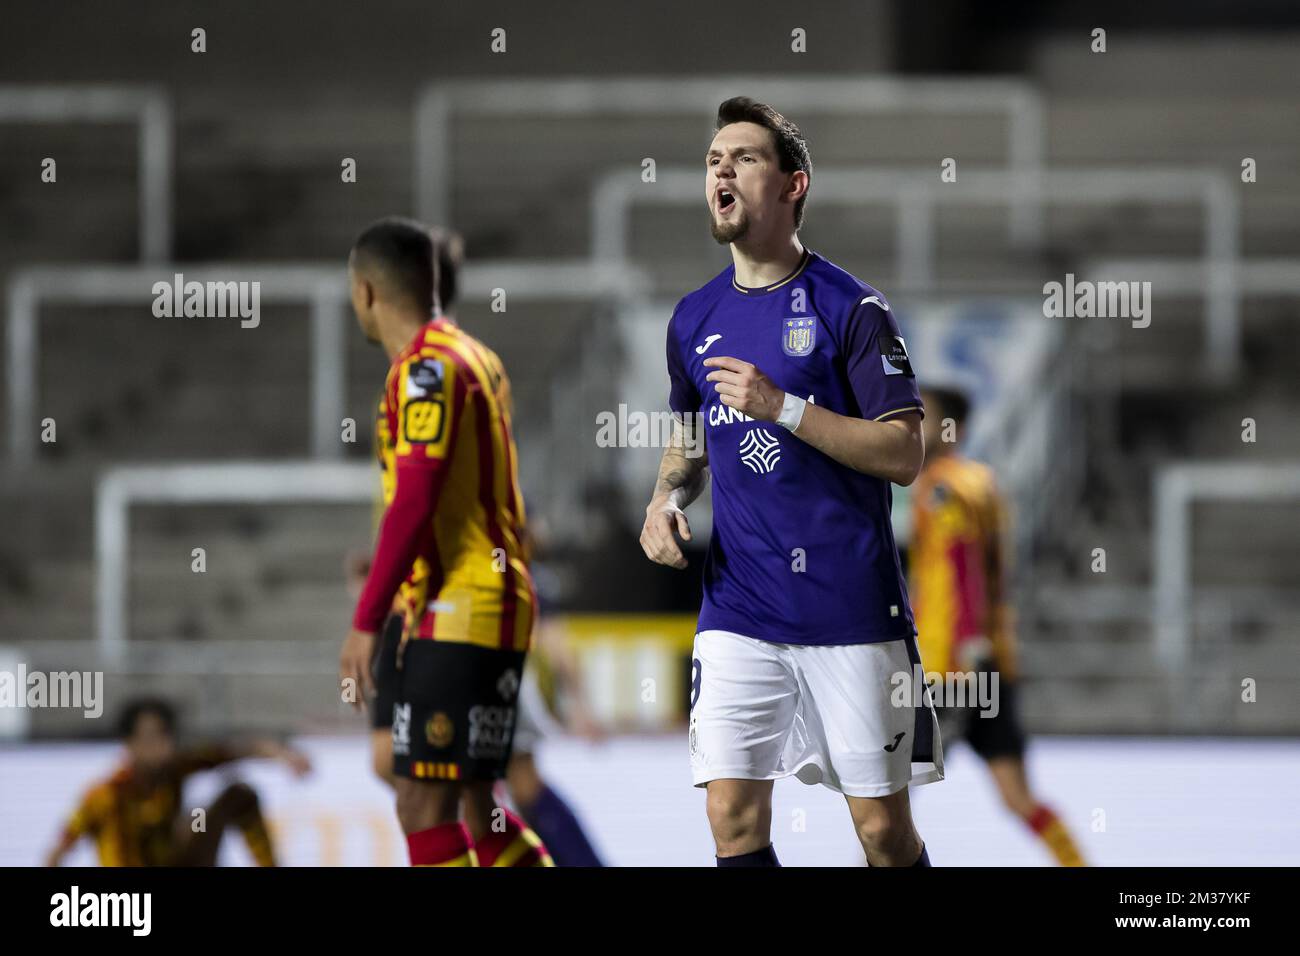 Anderlecht's Yari Verschaeren and Anderlecht's Benito Raman celebrate after  Raman scored the 1-1, Stock Photo, Picture And Rights Managed Image.  Pic. VPM-3105841